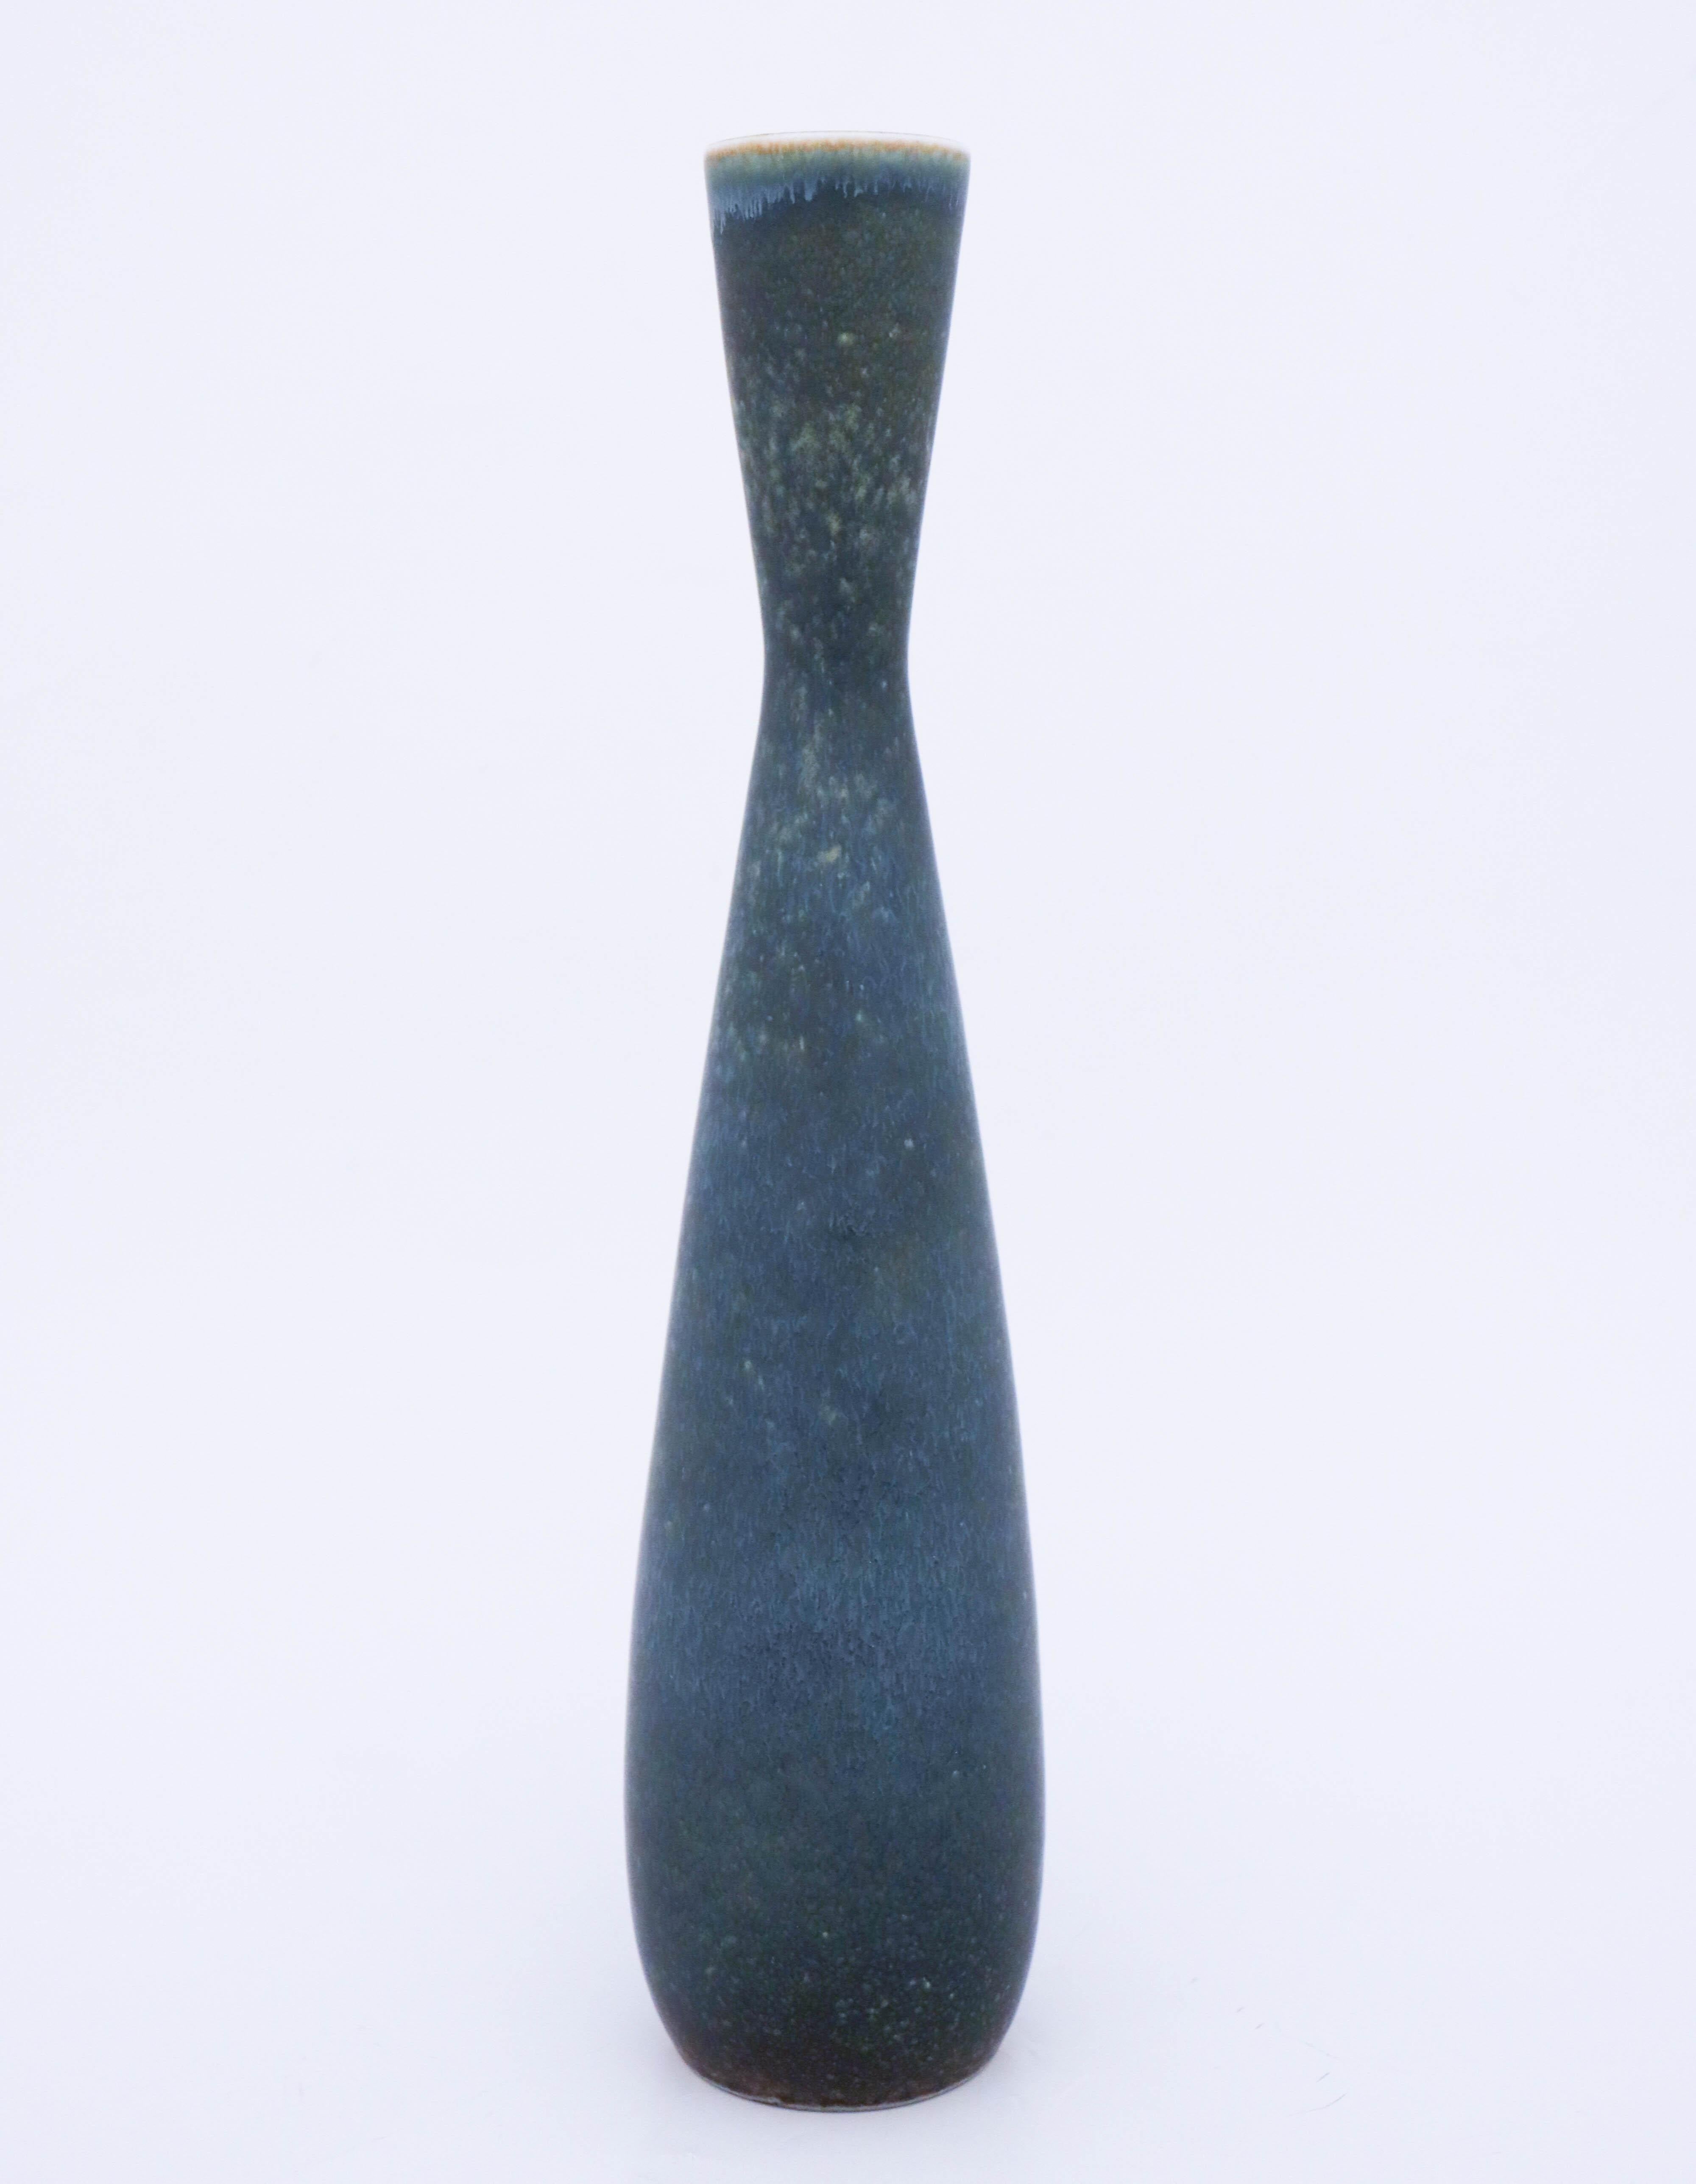 A beautiful midcentury Swedish vase in stoneware by Rörstrand, designed by Carl-Harry Stålhane. This large and unique vase was produced in 1960, it is marked as 2nd quality and do have a white mark in the glaze.